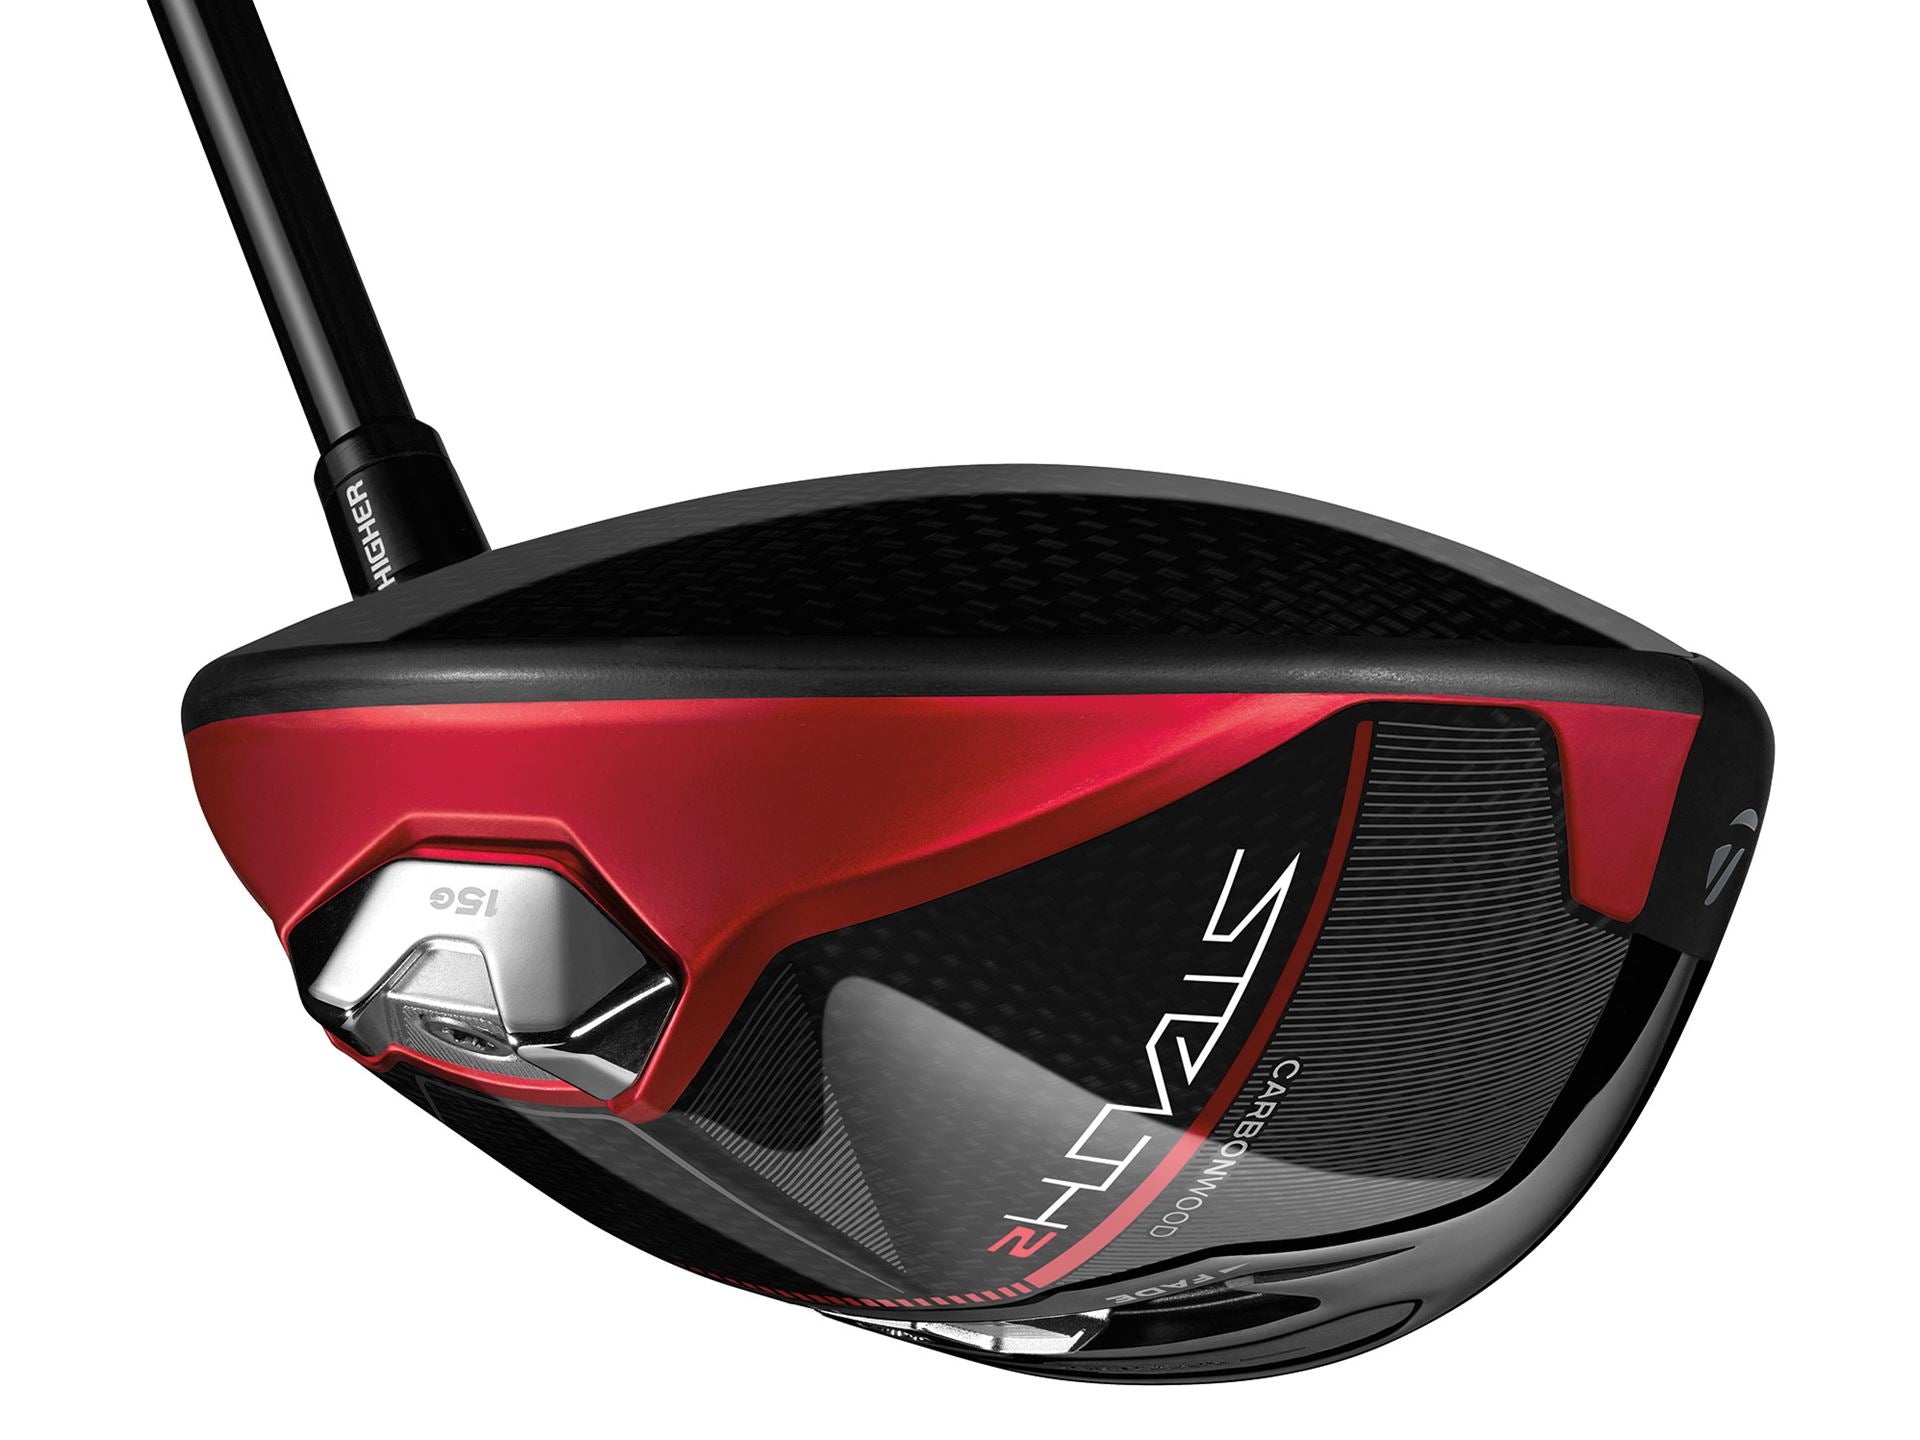 More Carbon, More Fargiveness: Introducing the TaylorMade Stealth